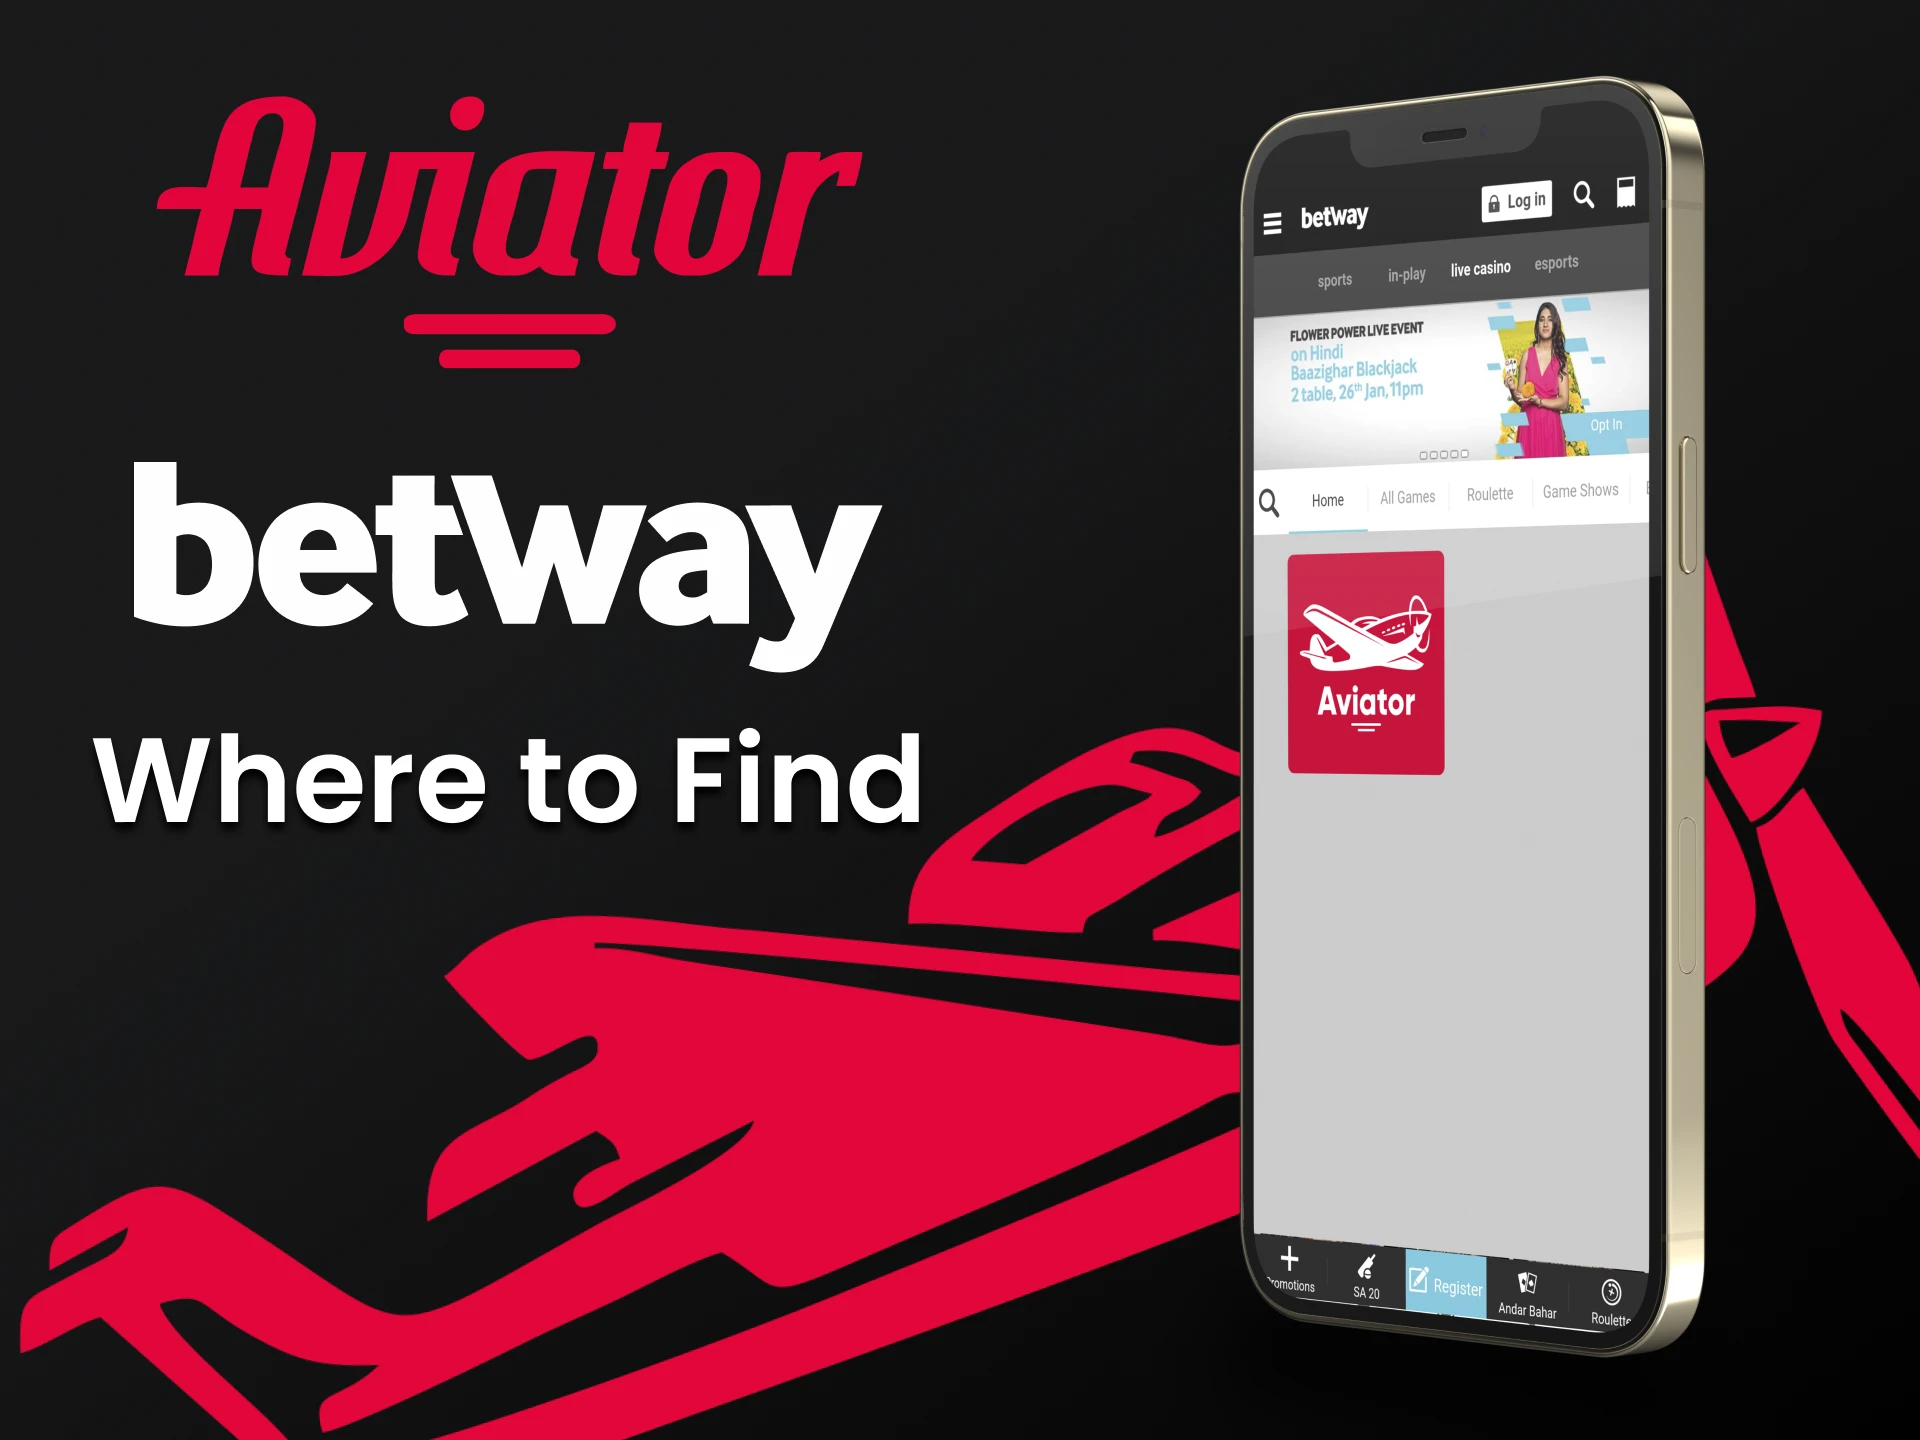 Go to the Betway app and find Aviator.